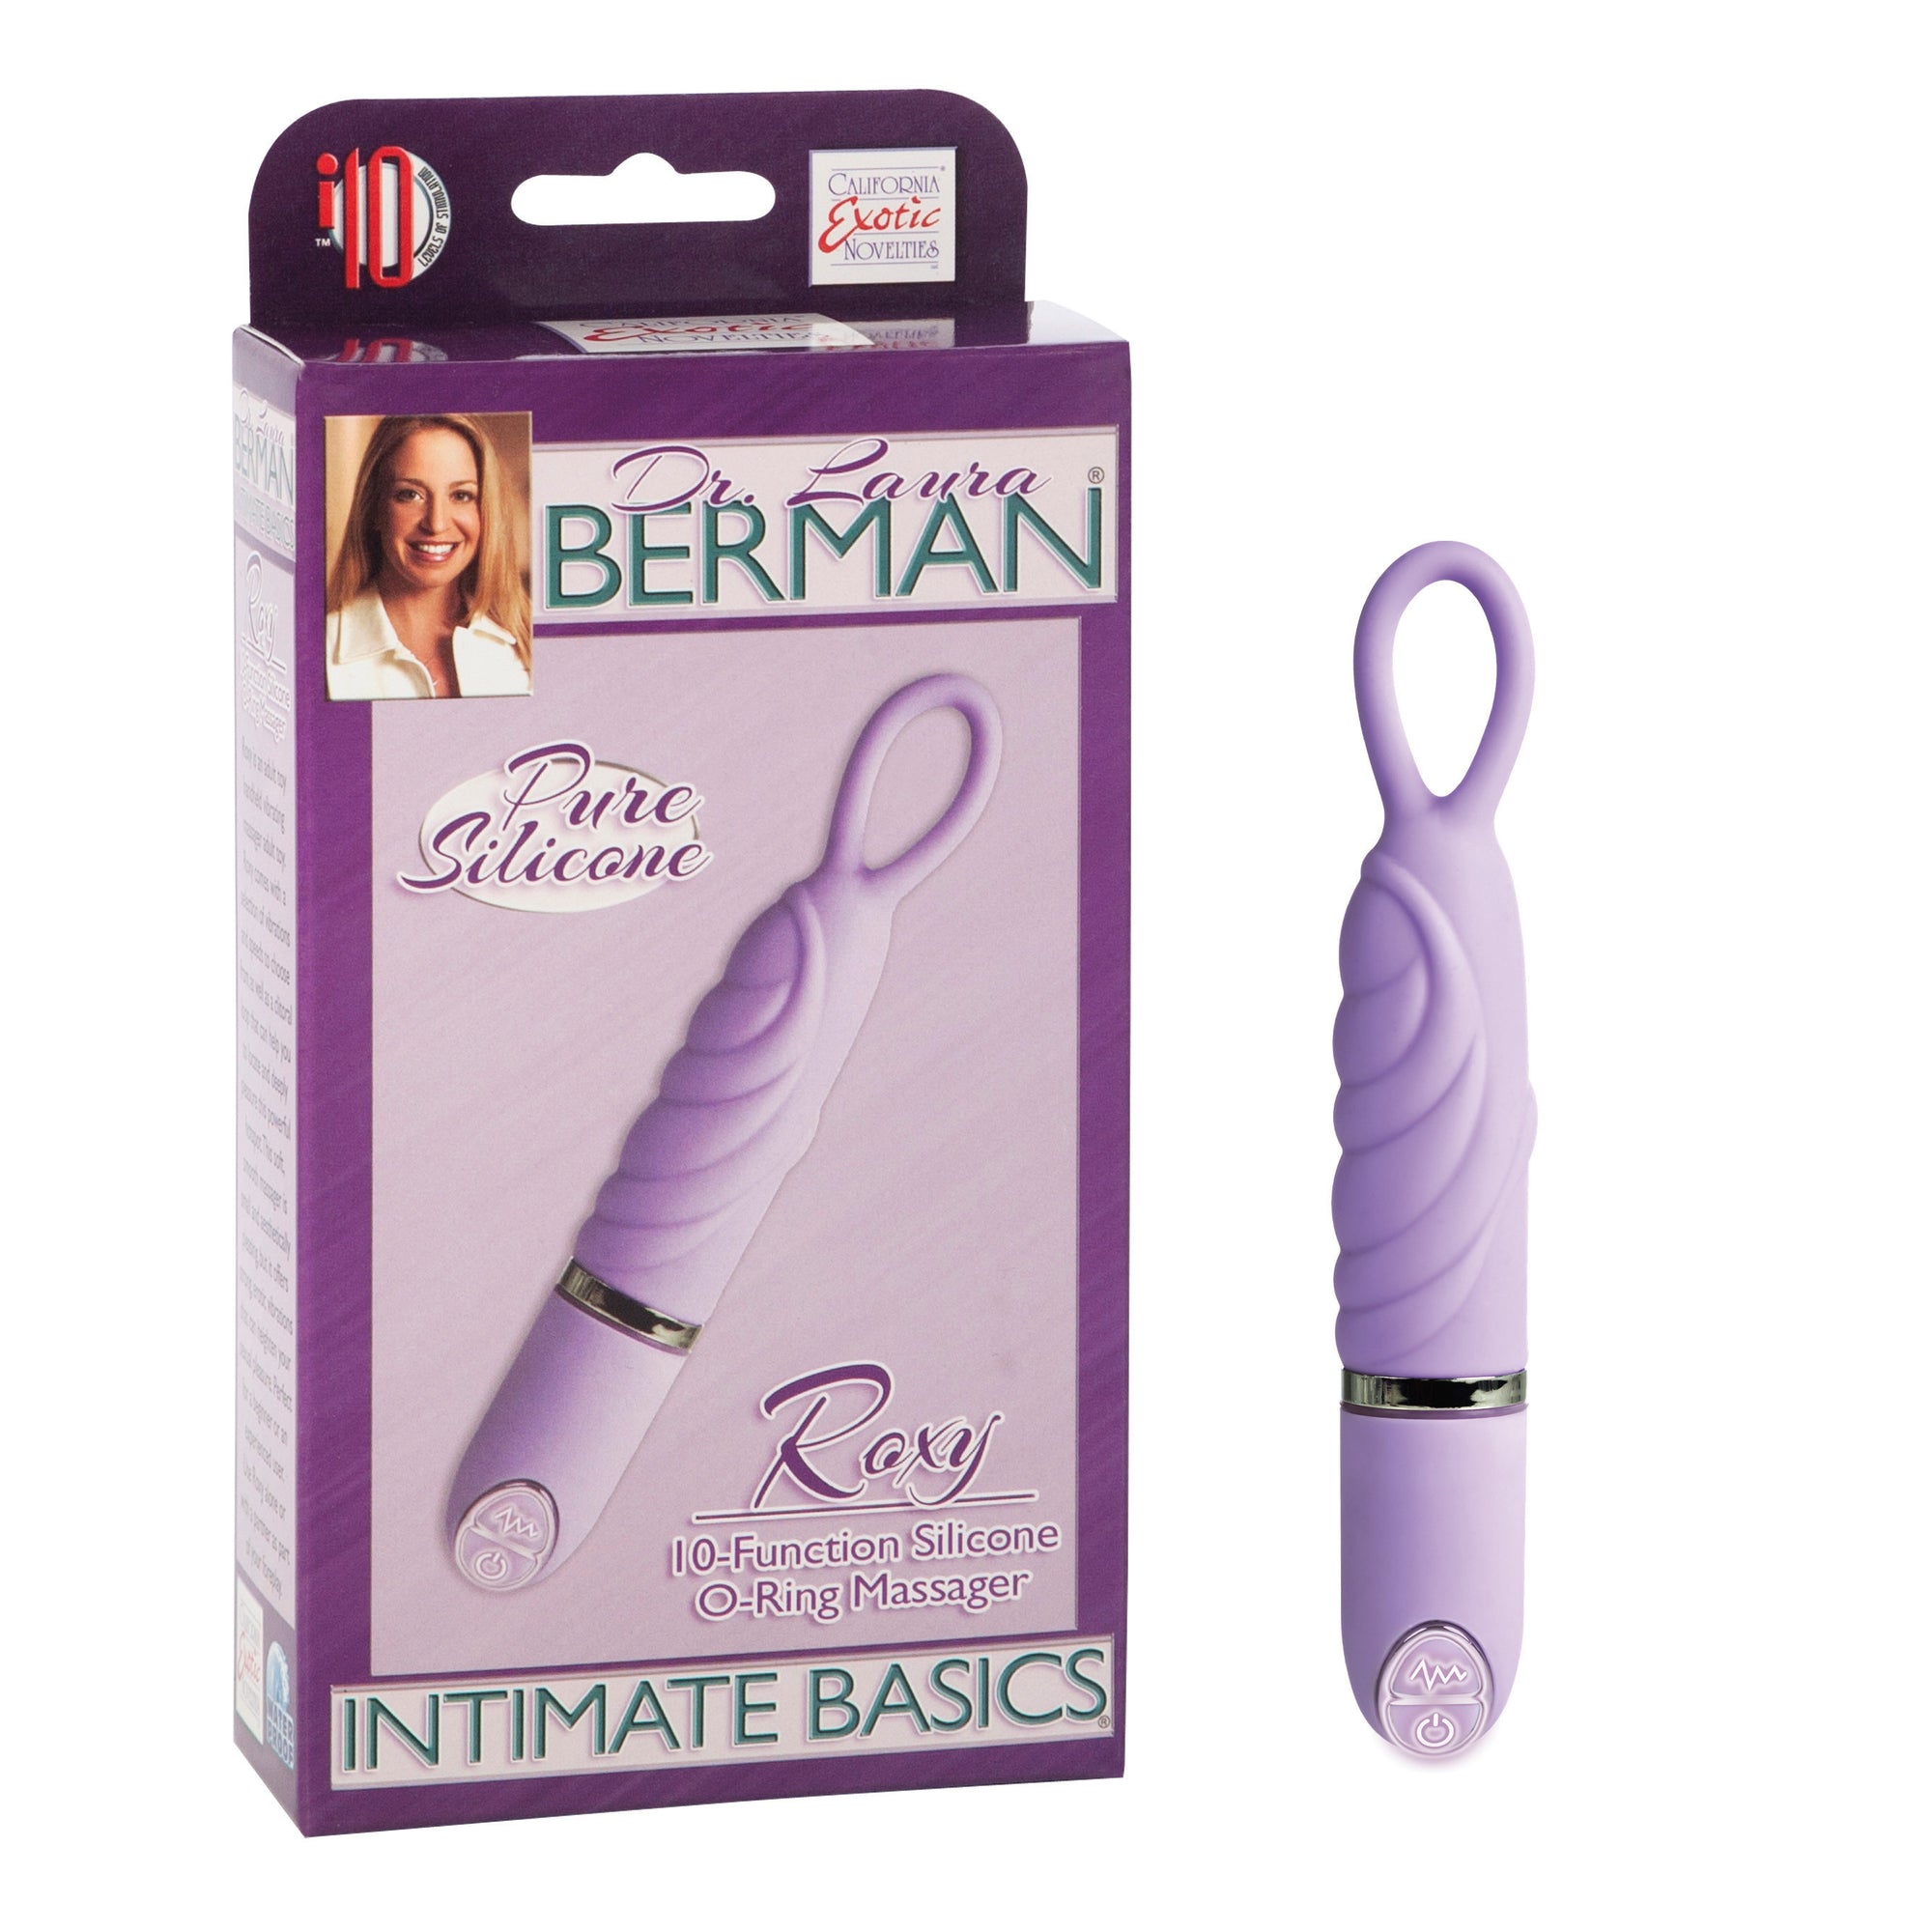 Dr. Berman Intimate Basics Roxy 10-Function Silicone O-Ring Massager